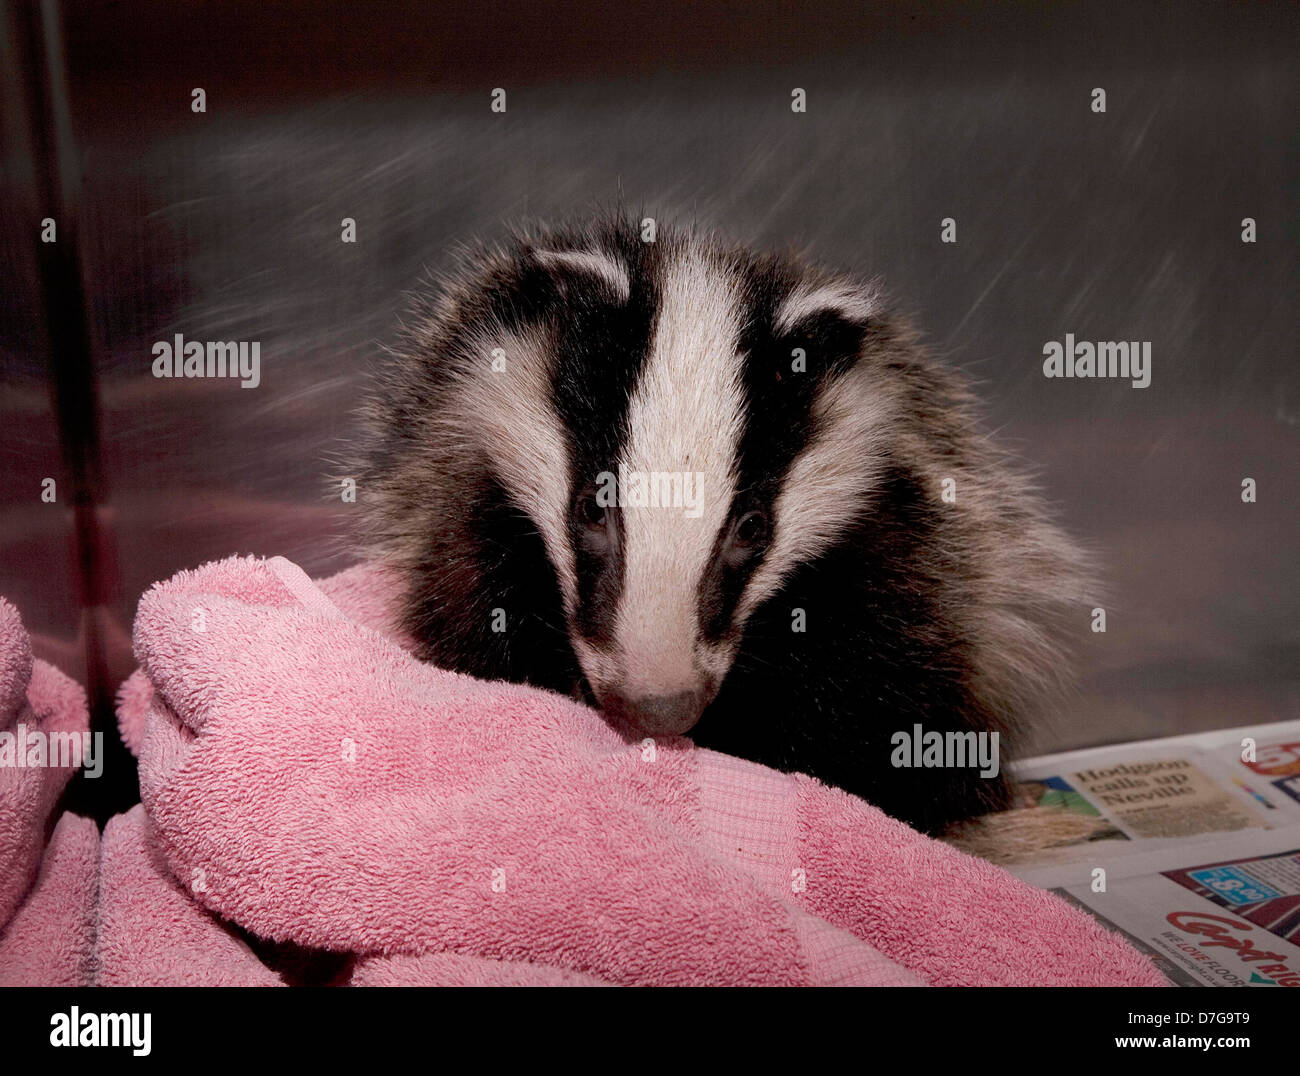 Badger cub in cage Stock Photo